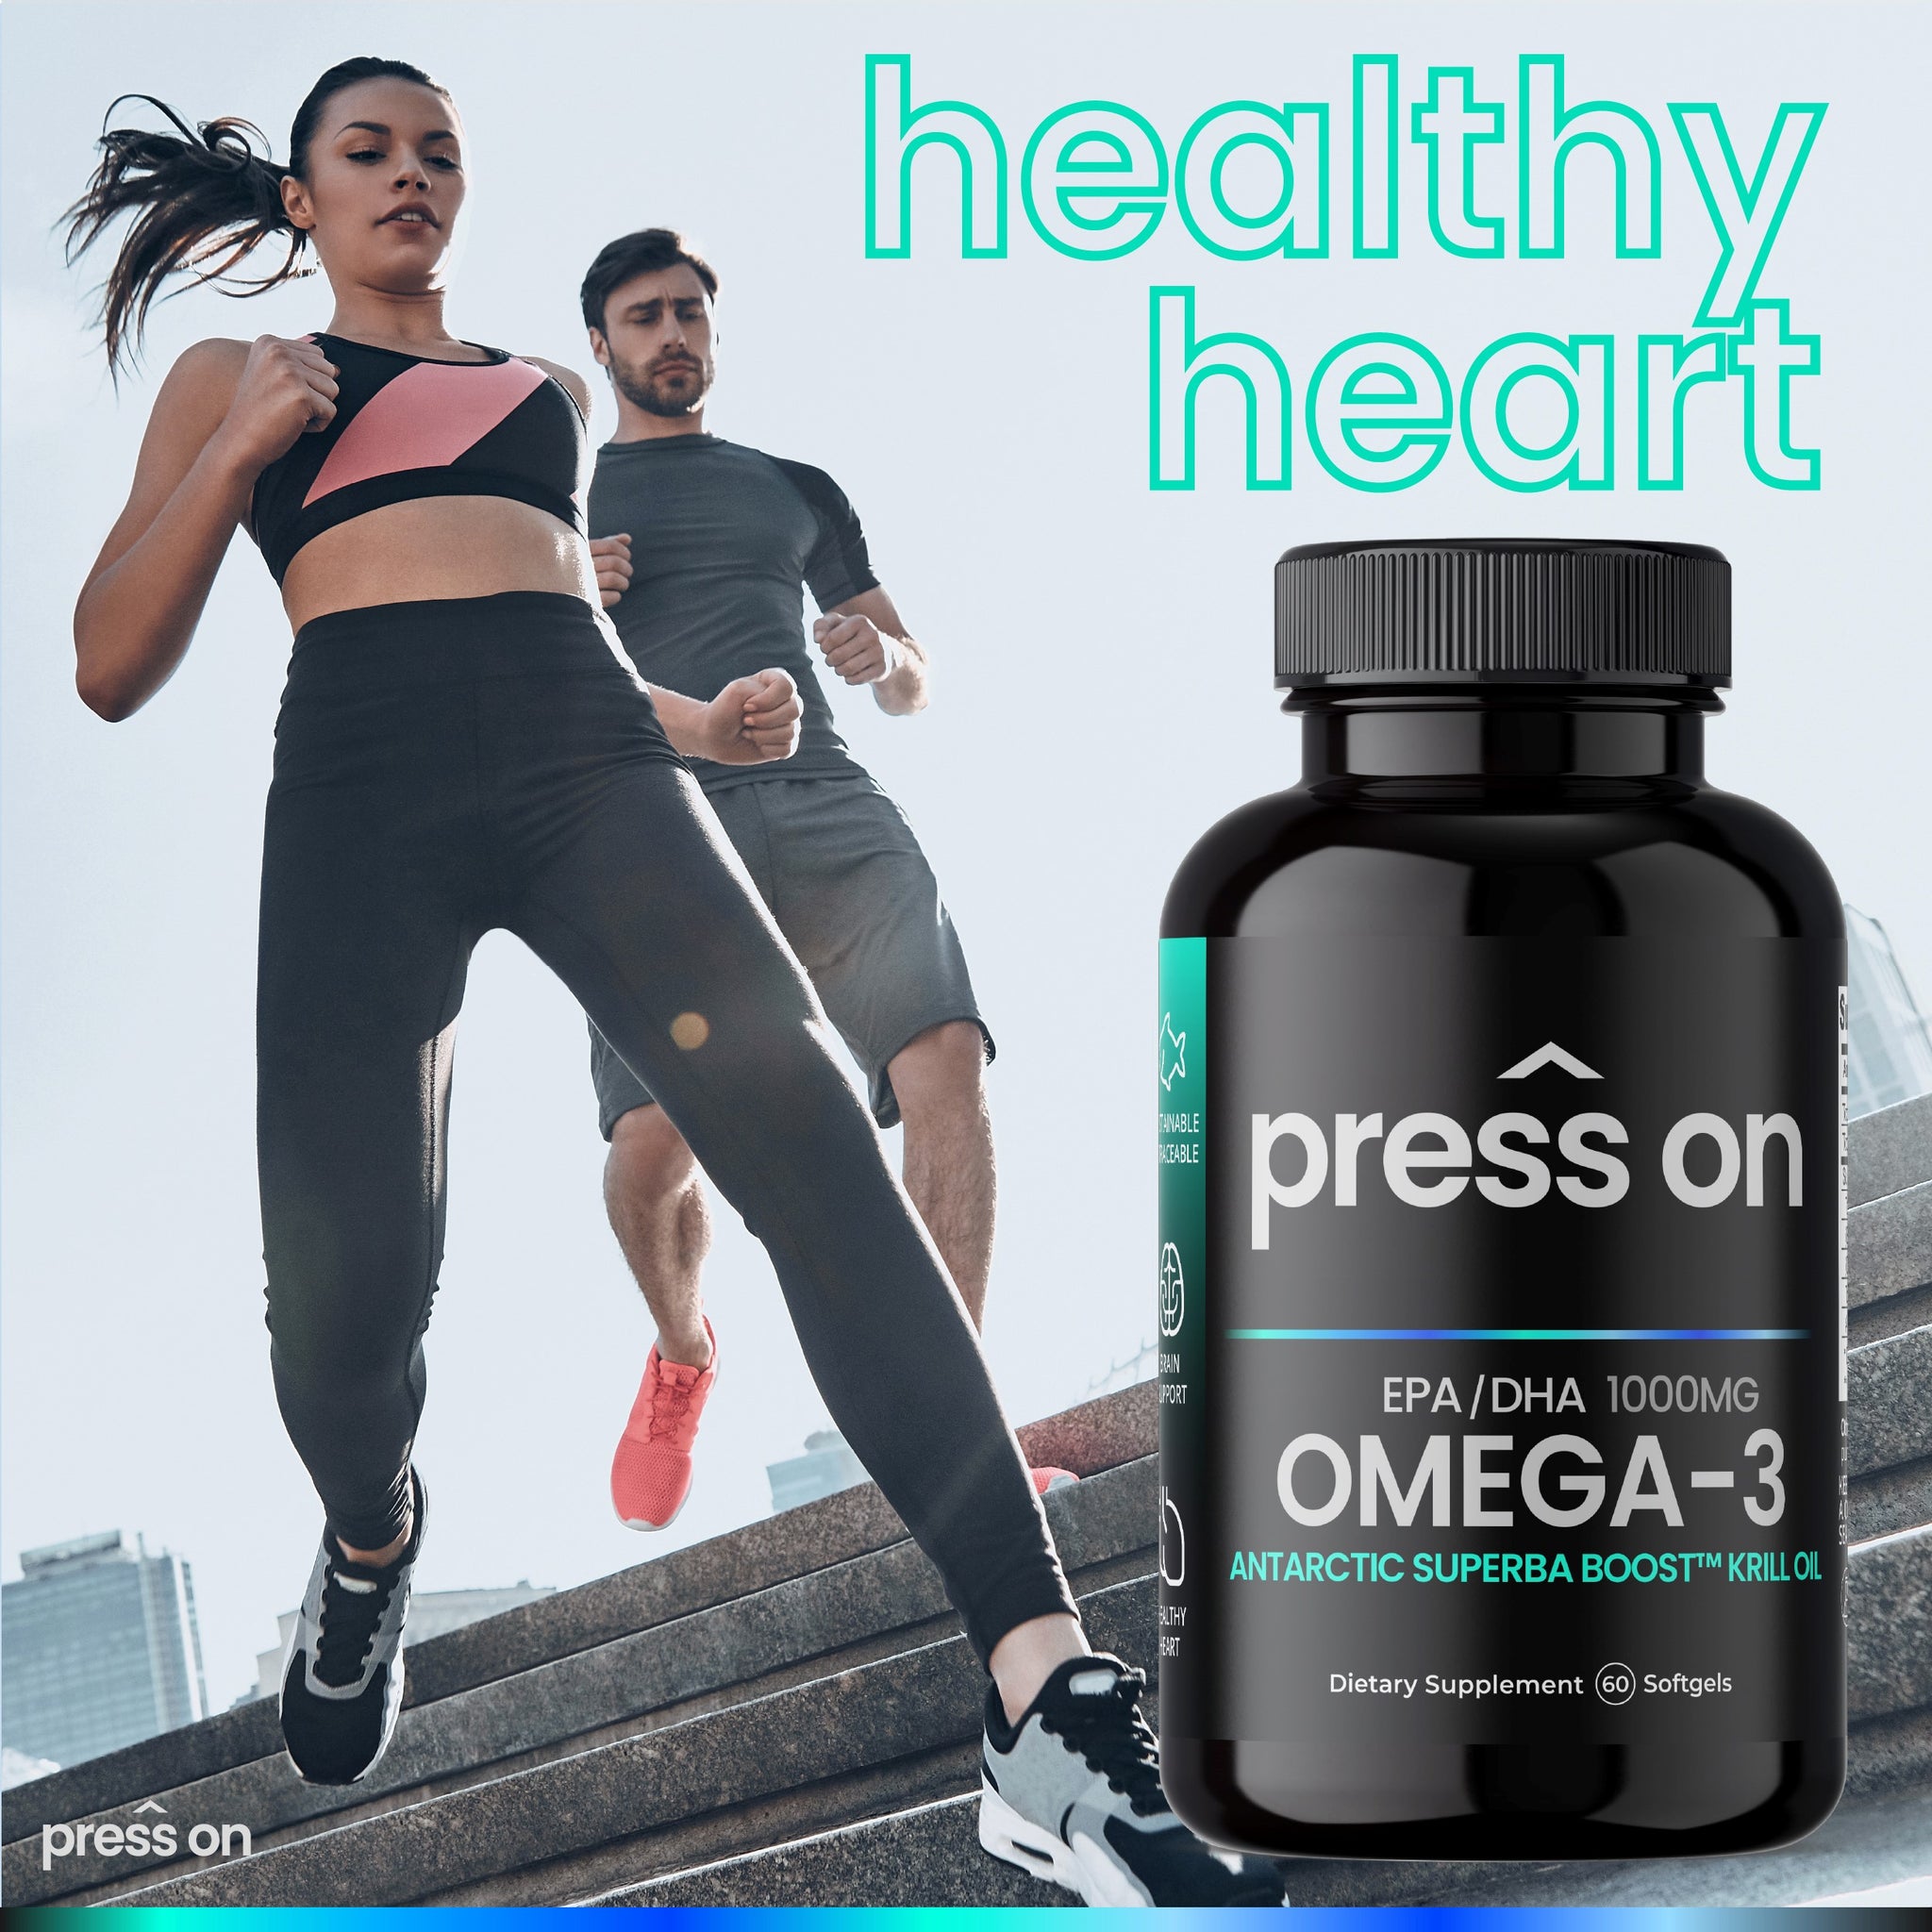 Omega 3 Krill Oil -Superba Boost, Omega 3 Supplement with Essential Fatty Acid Combination of EPA & DHA